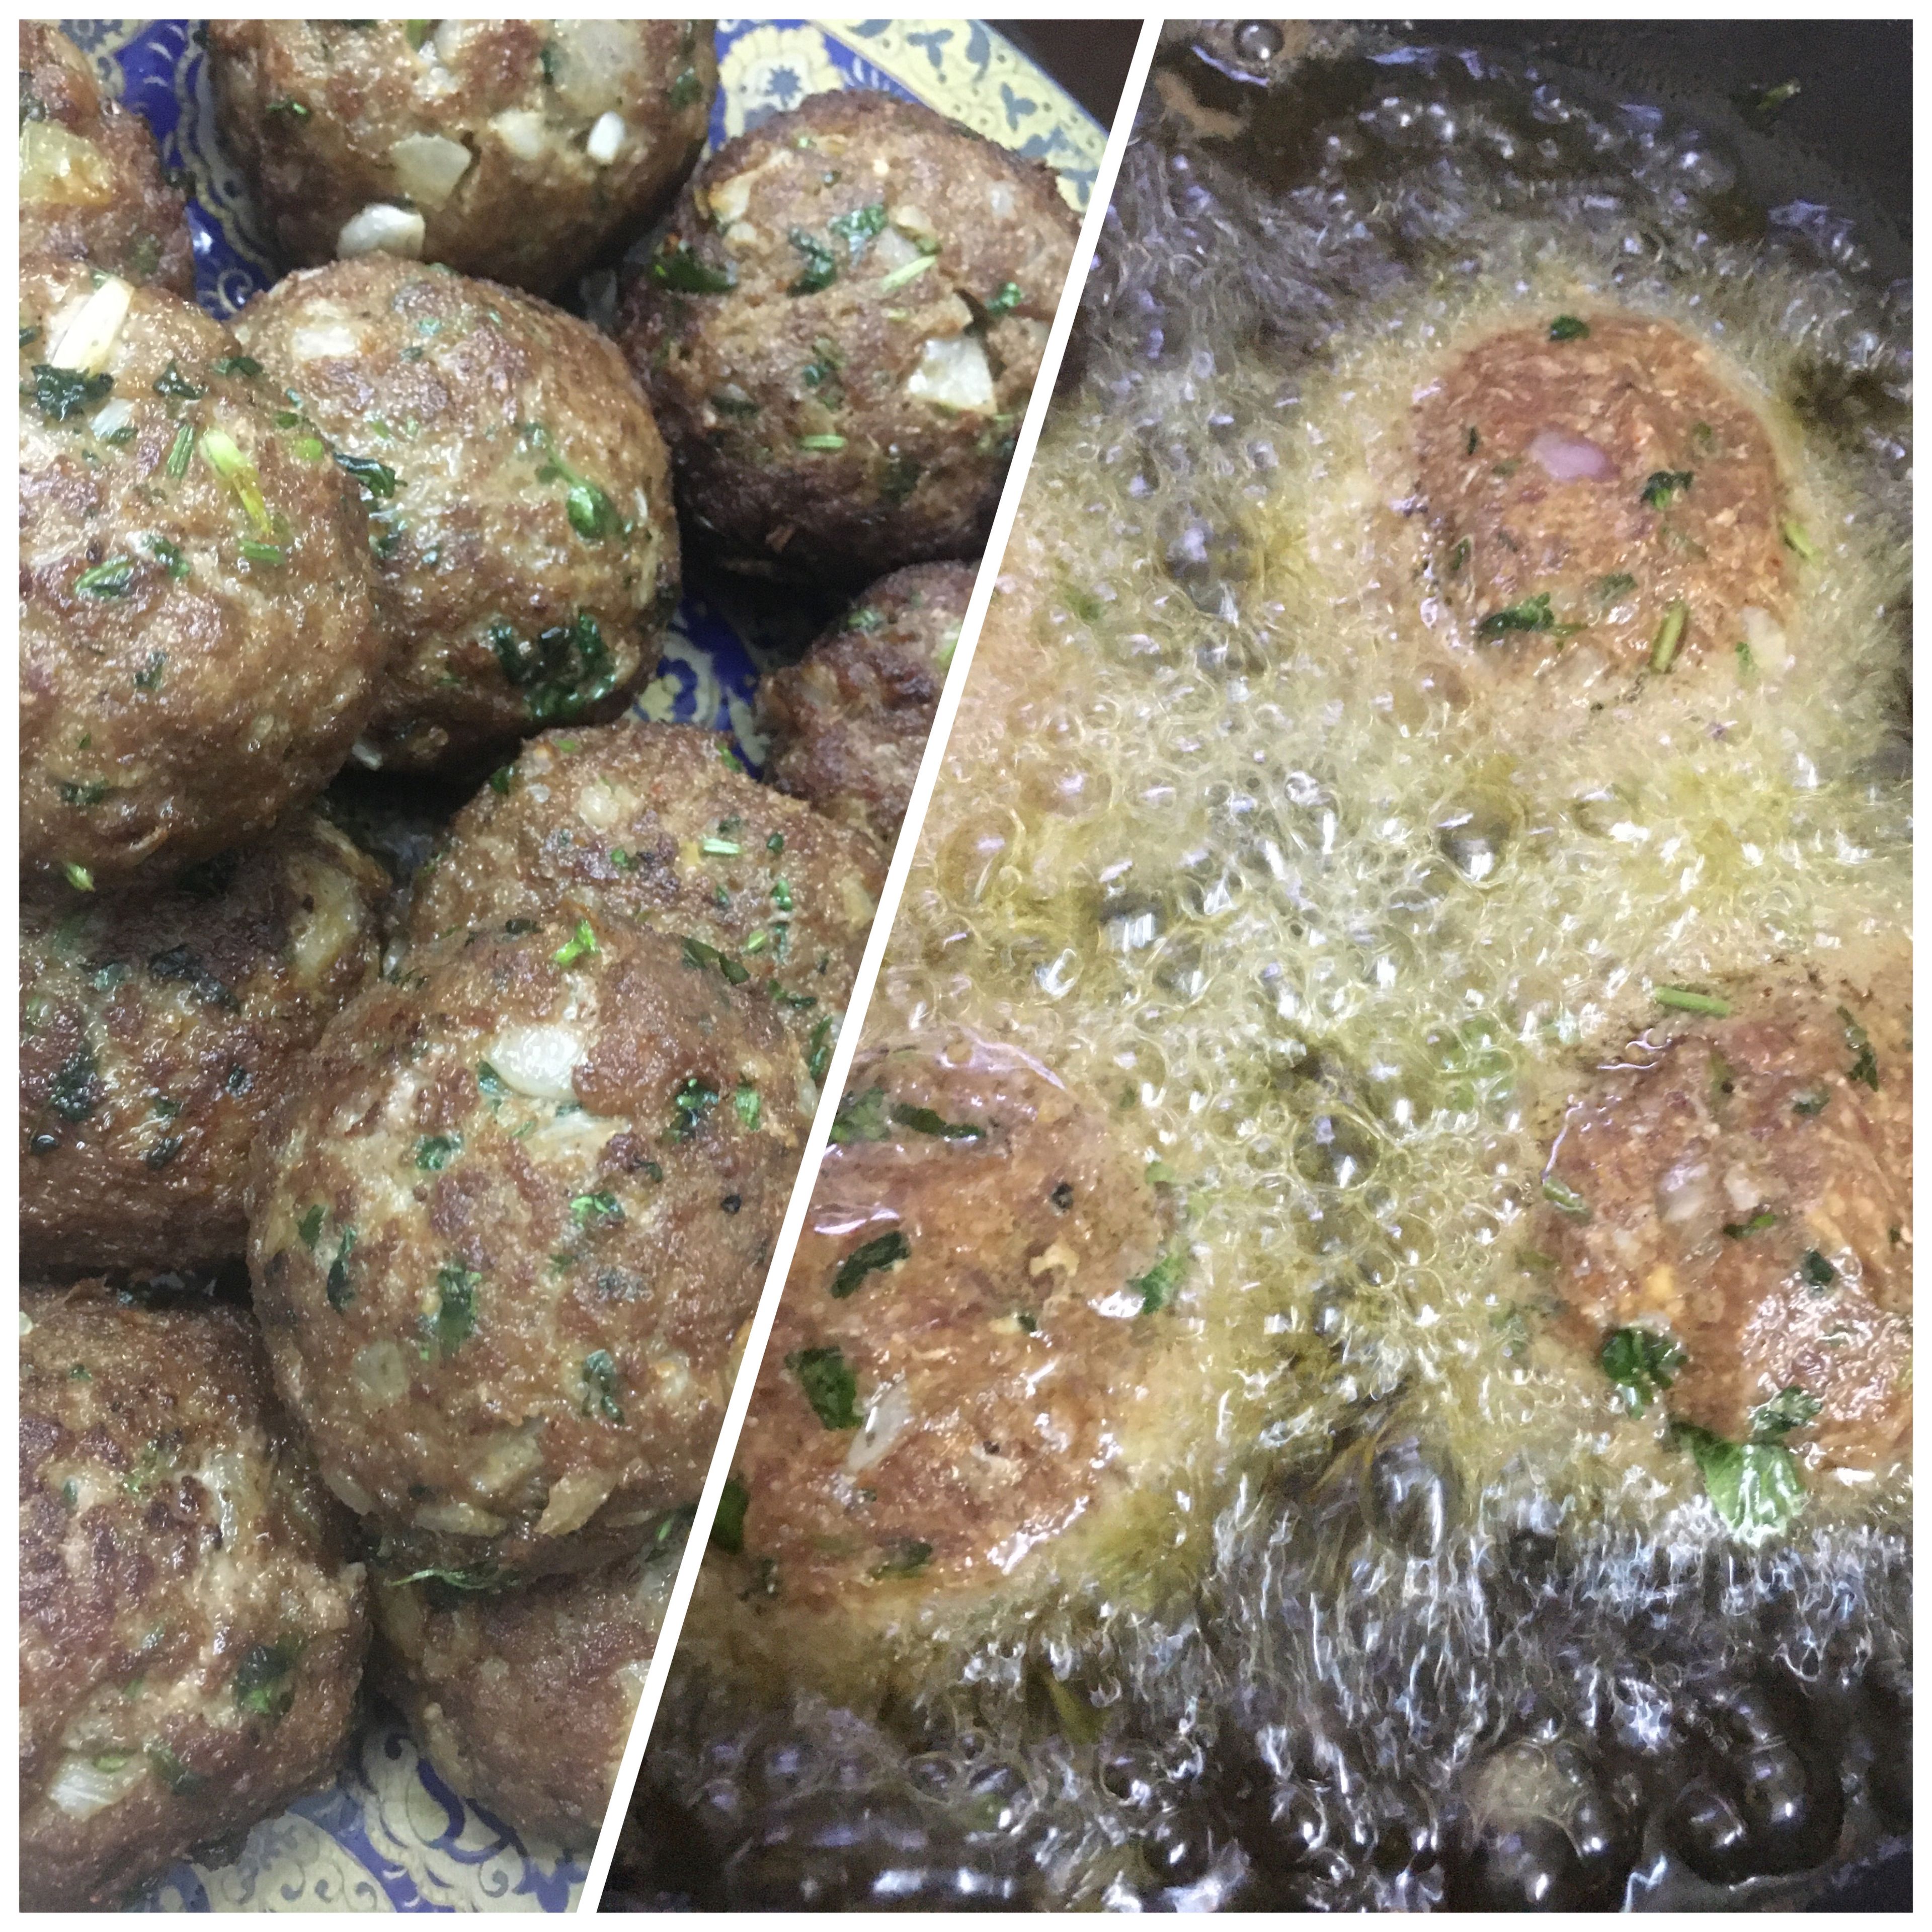 Heat the oil in a large skillet and fry the meatballs in batches,when the meatball is golden brown and slightly crispy remove from the oil and drain on paper towel.